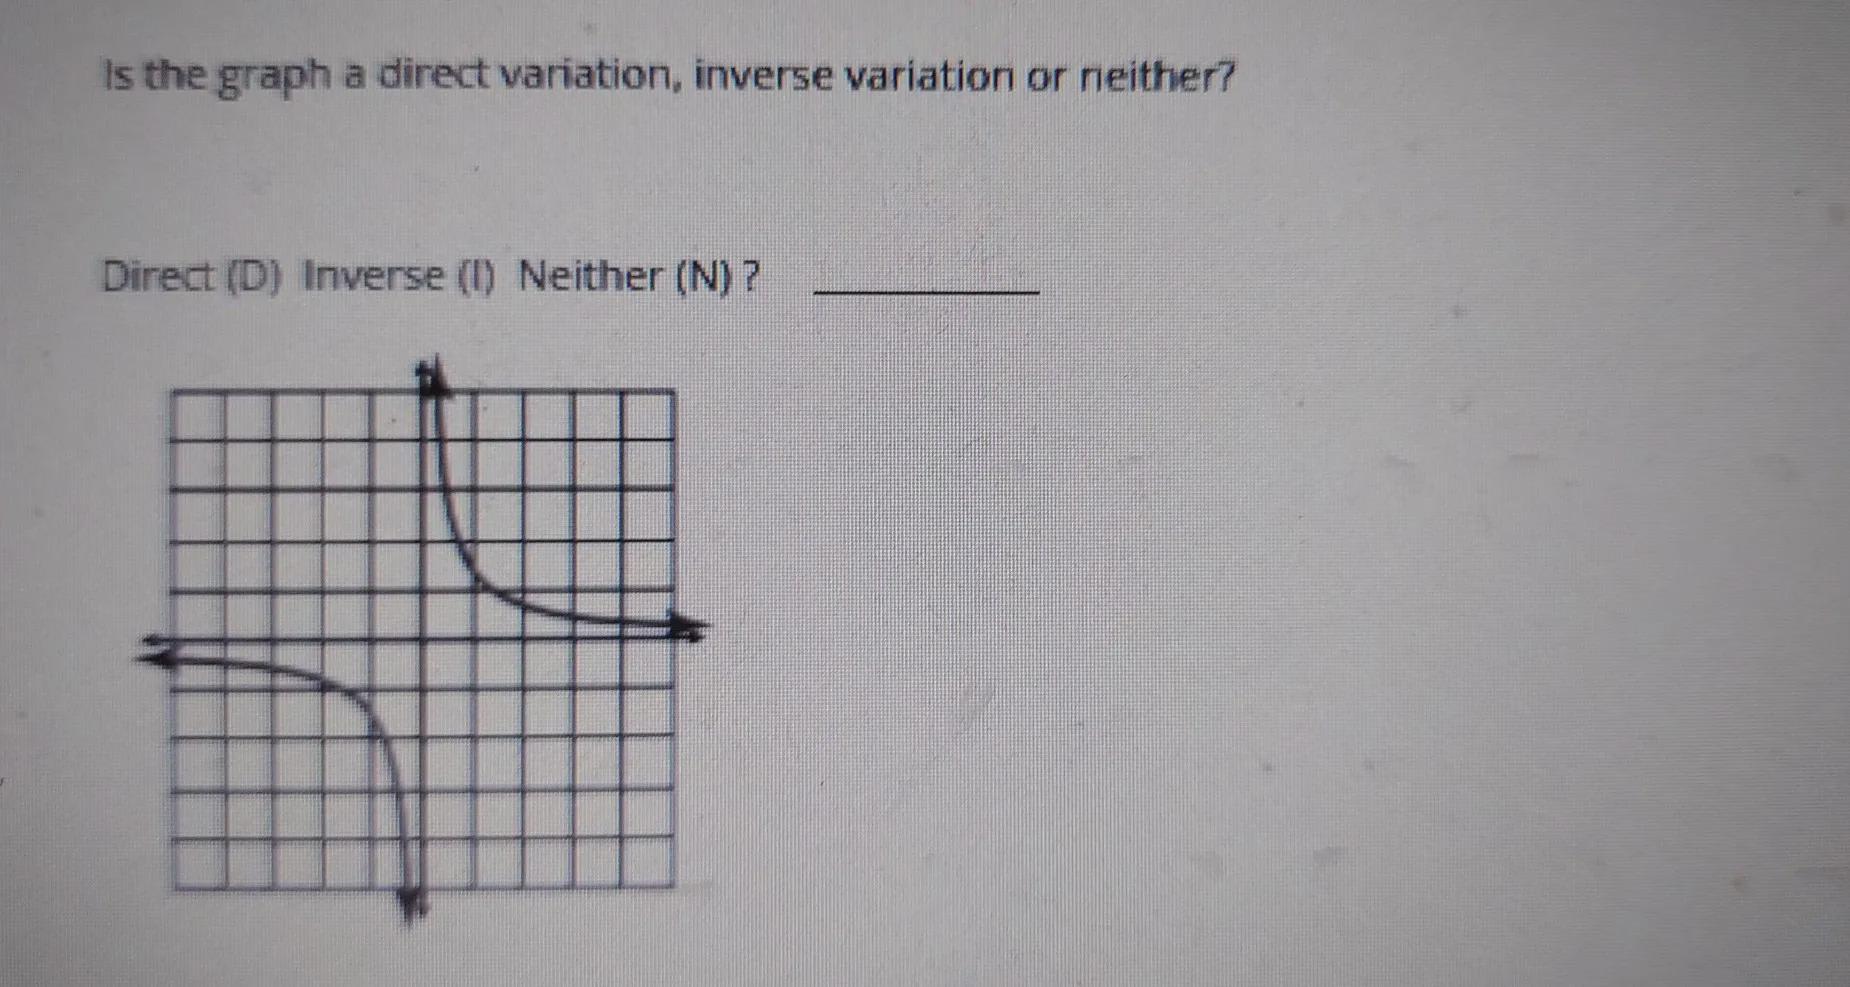 Hello Everybody! Can Anyone Help Me With This? I Just Need To Know If It's A Direct Variation, A Inverse